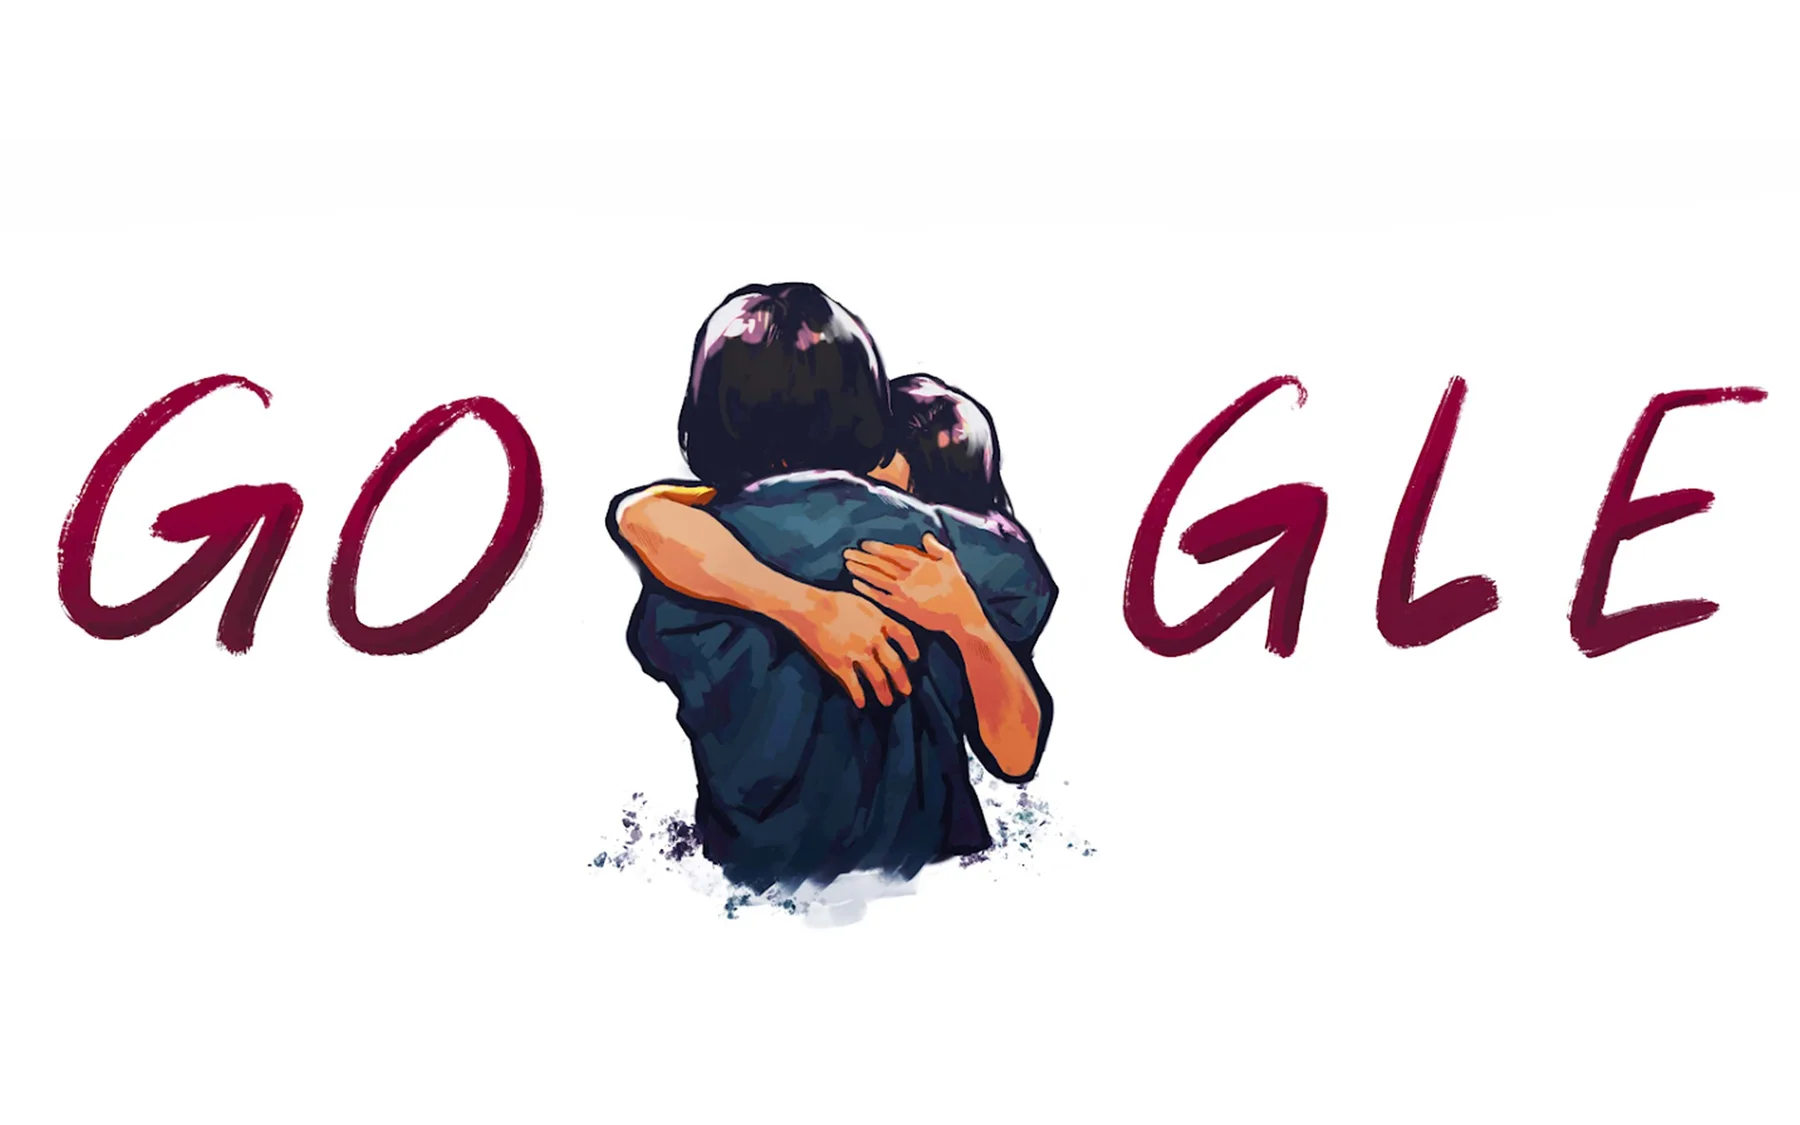 A drawing of a girl tightly hugging her mother in the middle of the word “Google”.